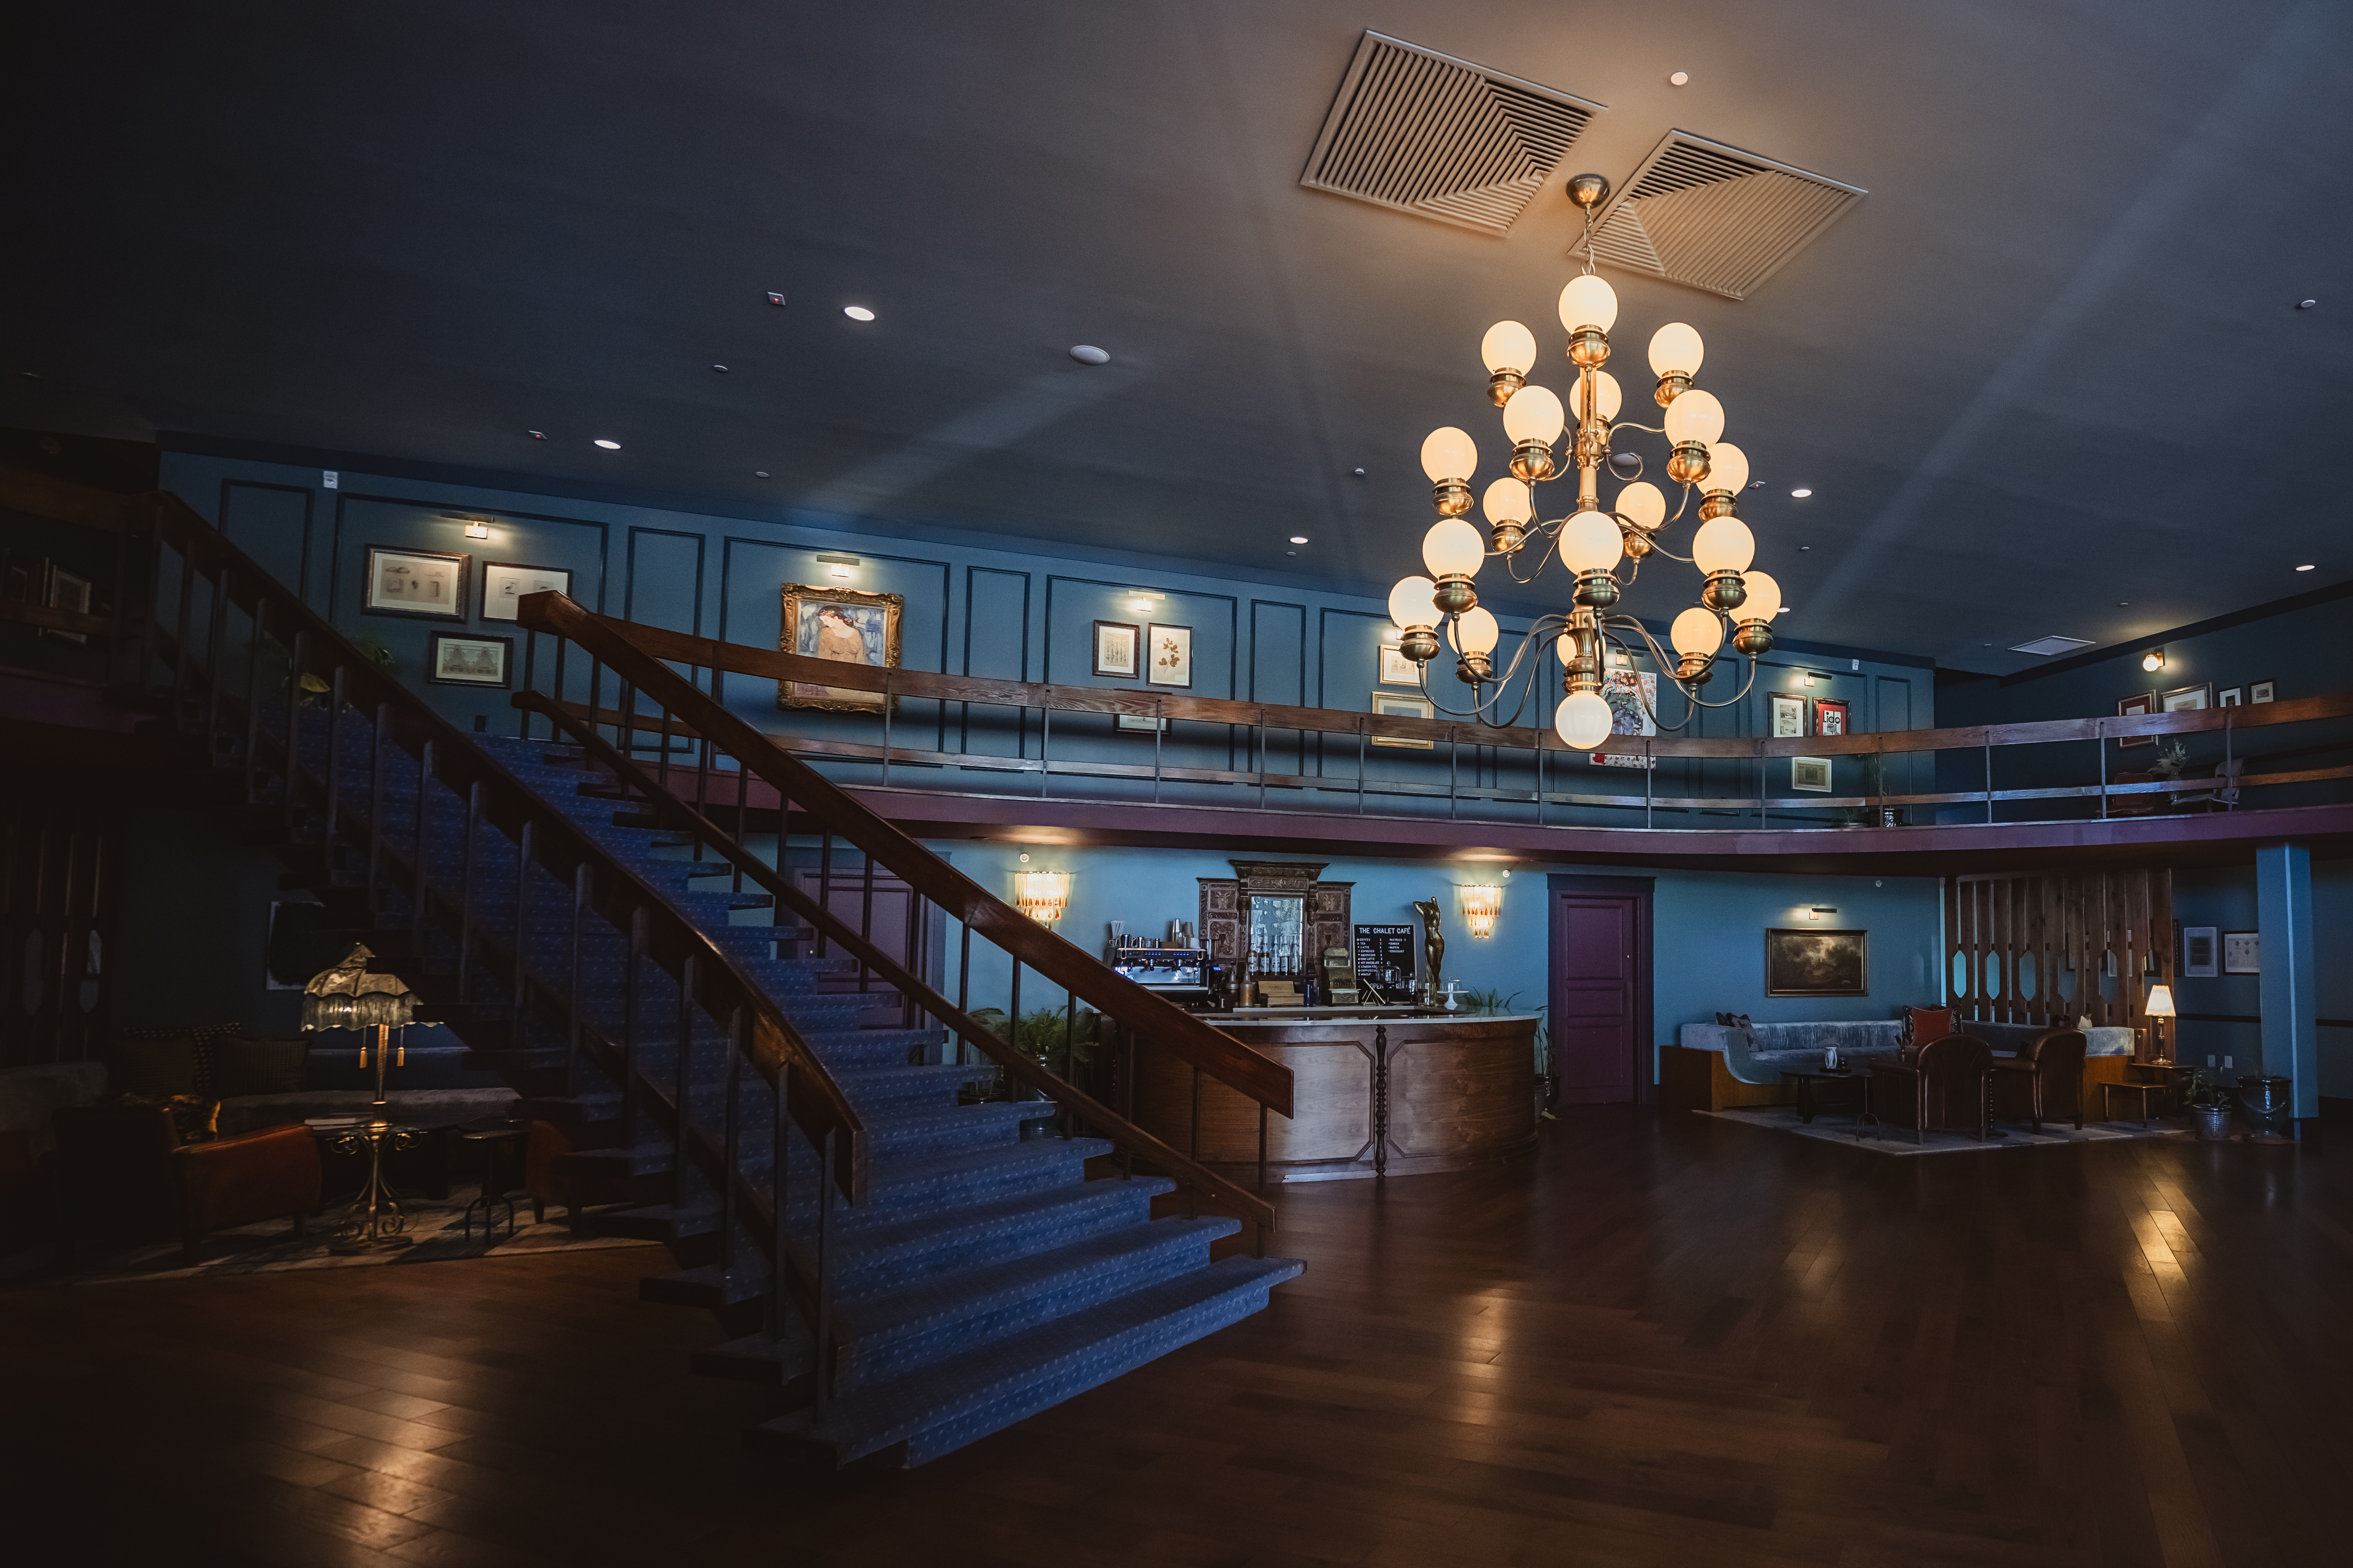 Chalet Hotel Lobby at the Chattanooga Choo Choo - Image Credit CHRISTIAN MICHELLE PHOTOGRAPHY